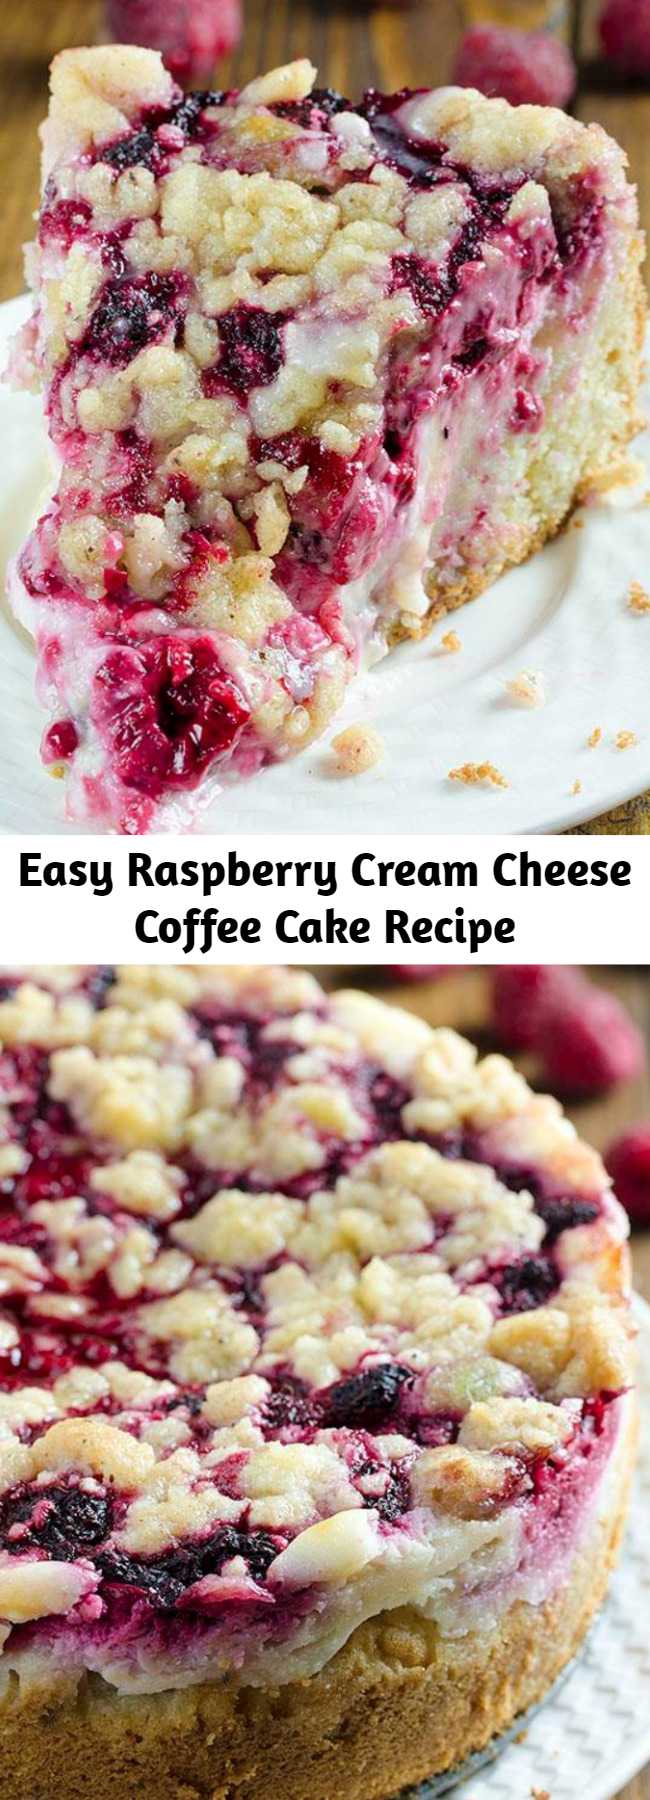 Easy Raspberry Cream Cheese Coffee Cake Recipe - Moist and buttery cake, creamy cheesecake filling, juicy raspberries and crunchy streusel topping. This fruit-filled coffee cake is tangy, creamy, and a light dessert that is perfect for company!